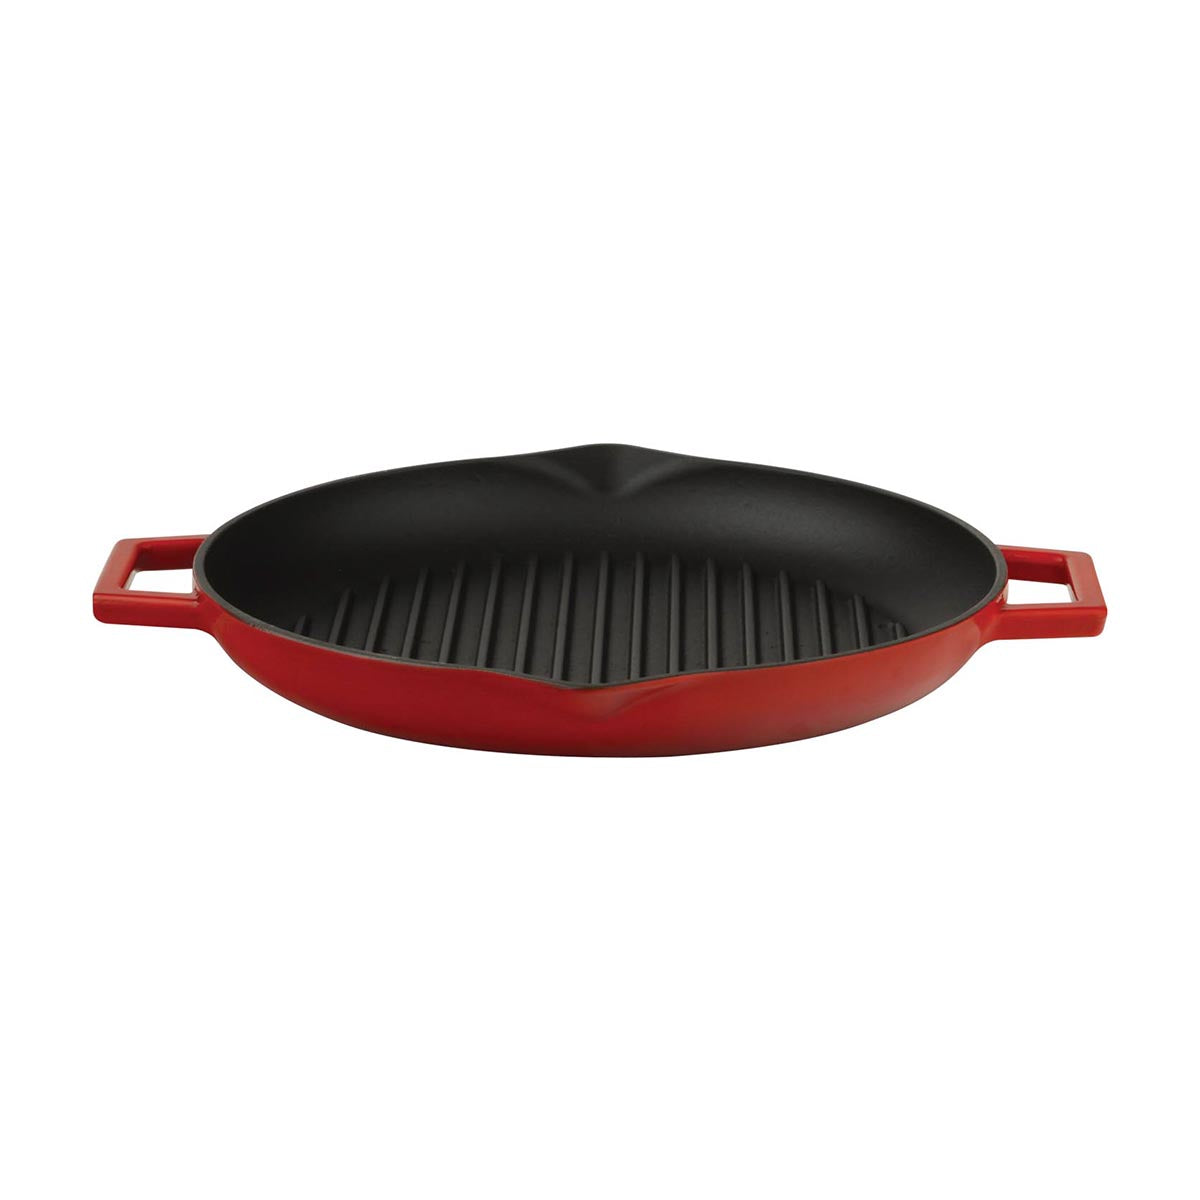 Lava Cast Iron Lava Enameled Cast Iron Grill Pan 11 inch-Edition Series with Pour Spouts Round Color: Red LV Y GT 28 Spr R